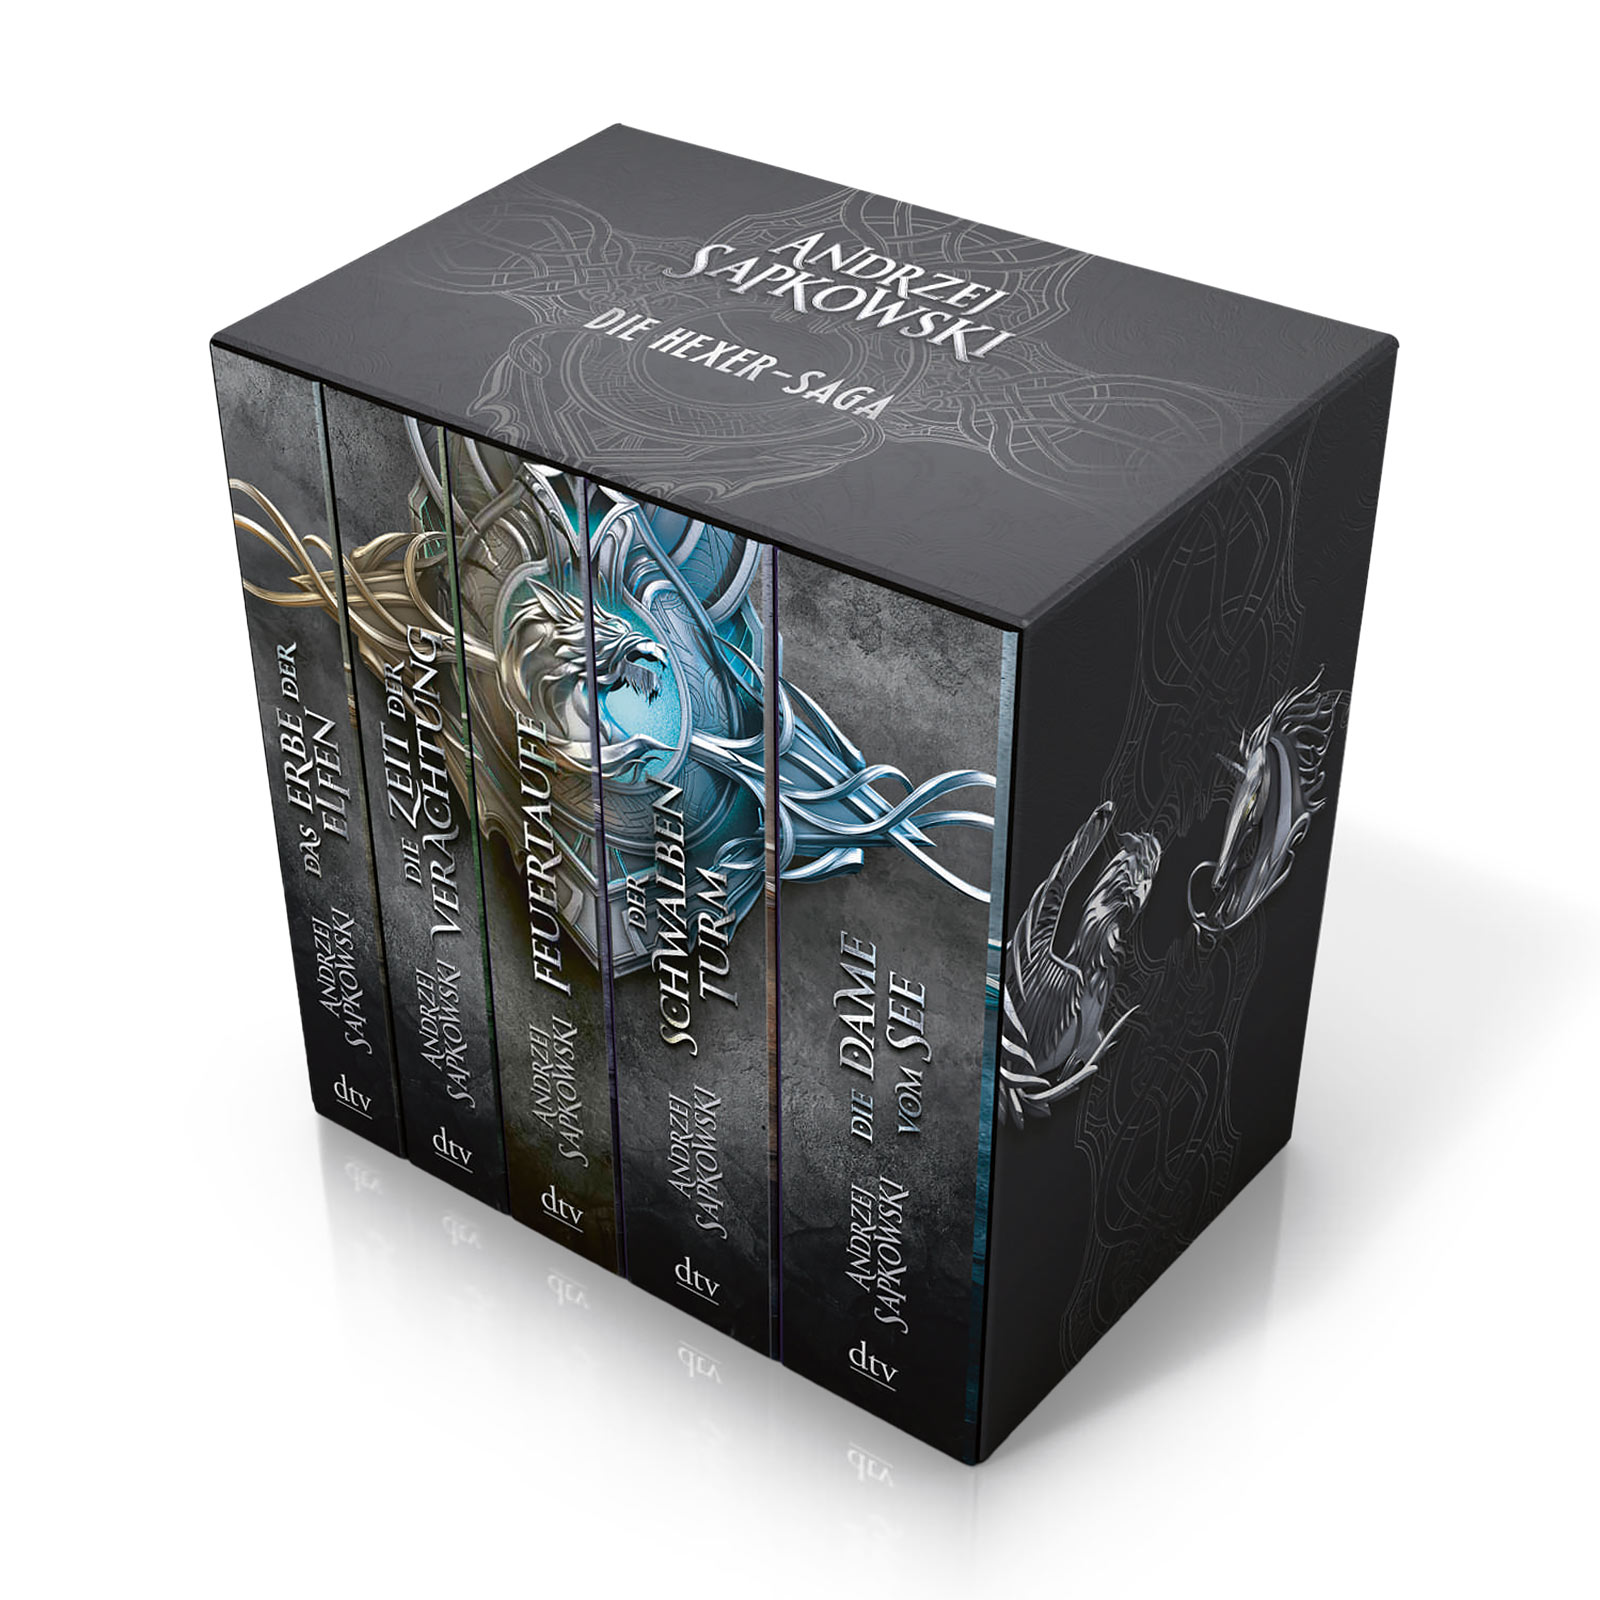 The 5 volumes of the Witcher Saga in a slipcase